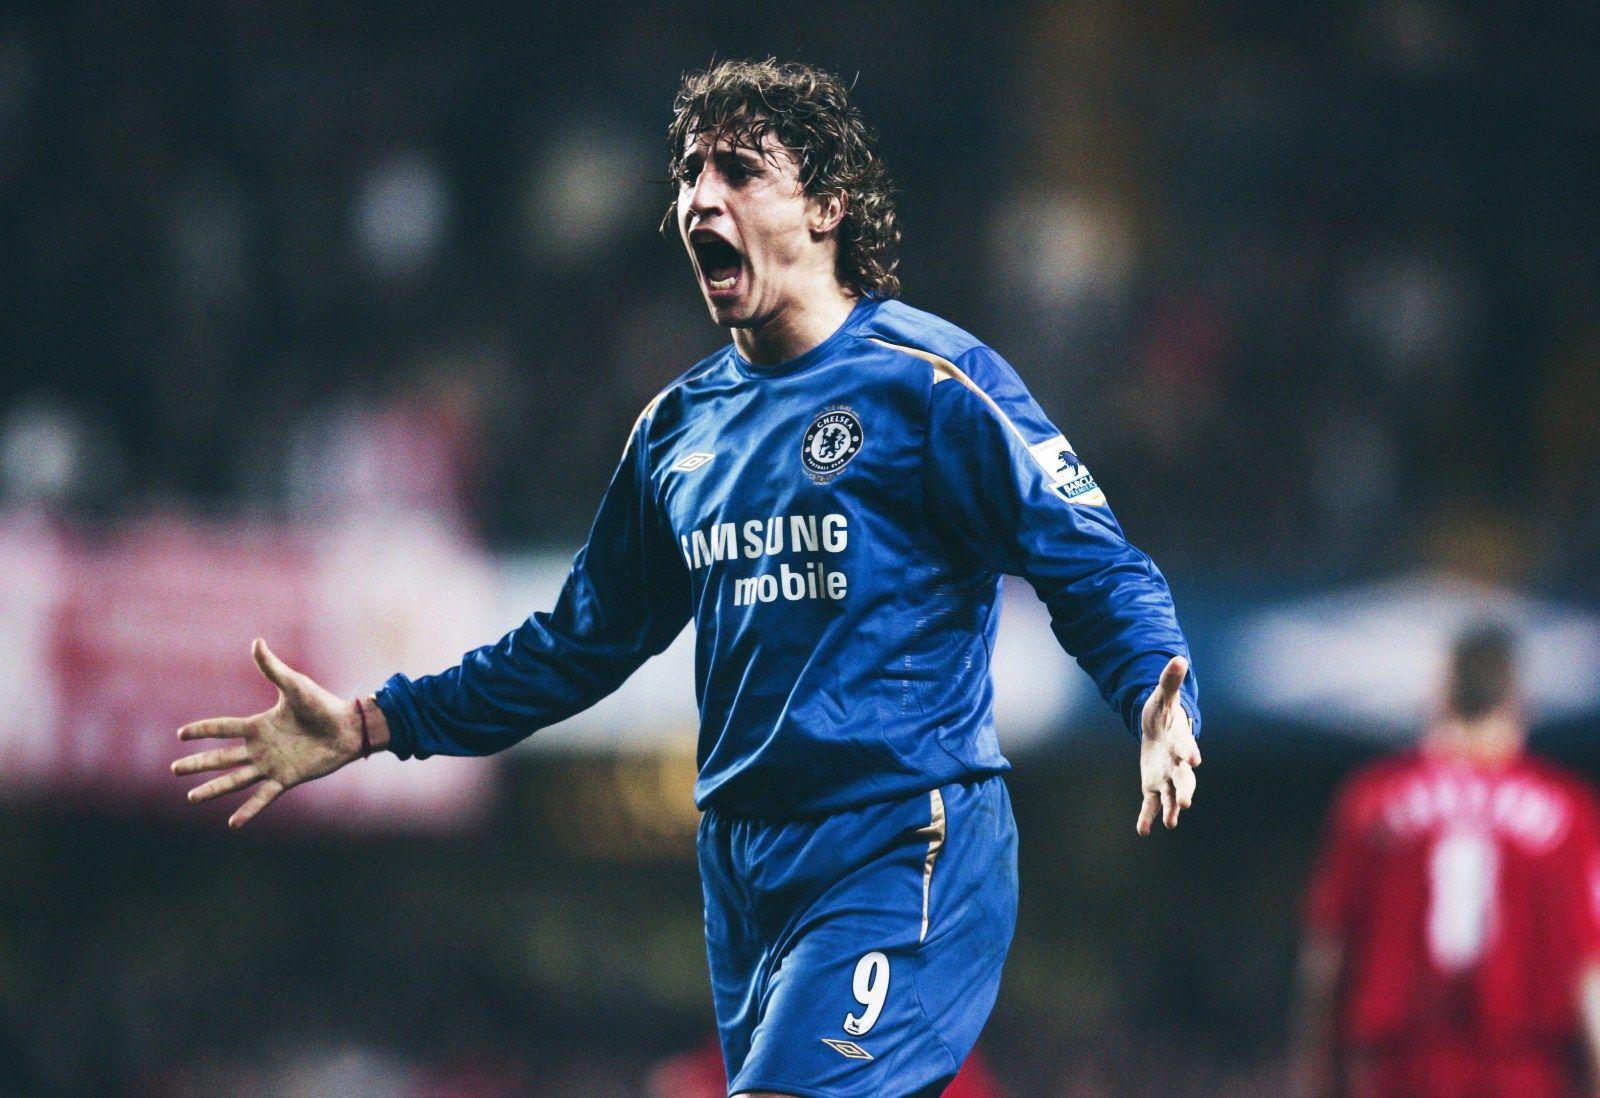 Why Did Hernán Crespo, Andriy Shevchenko And Other Big Name Strikers